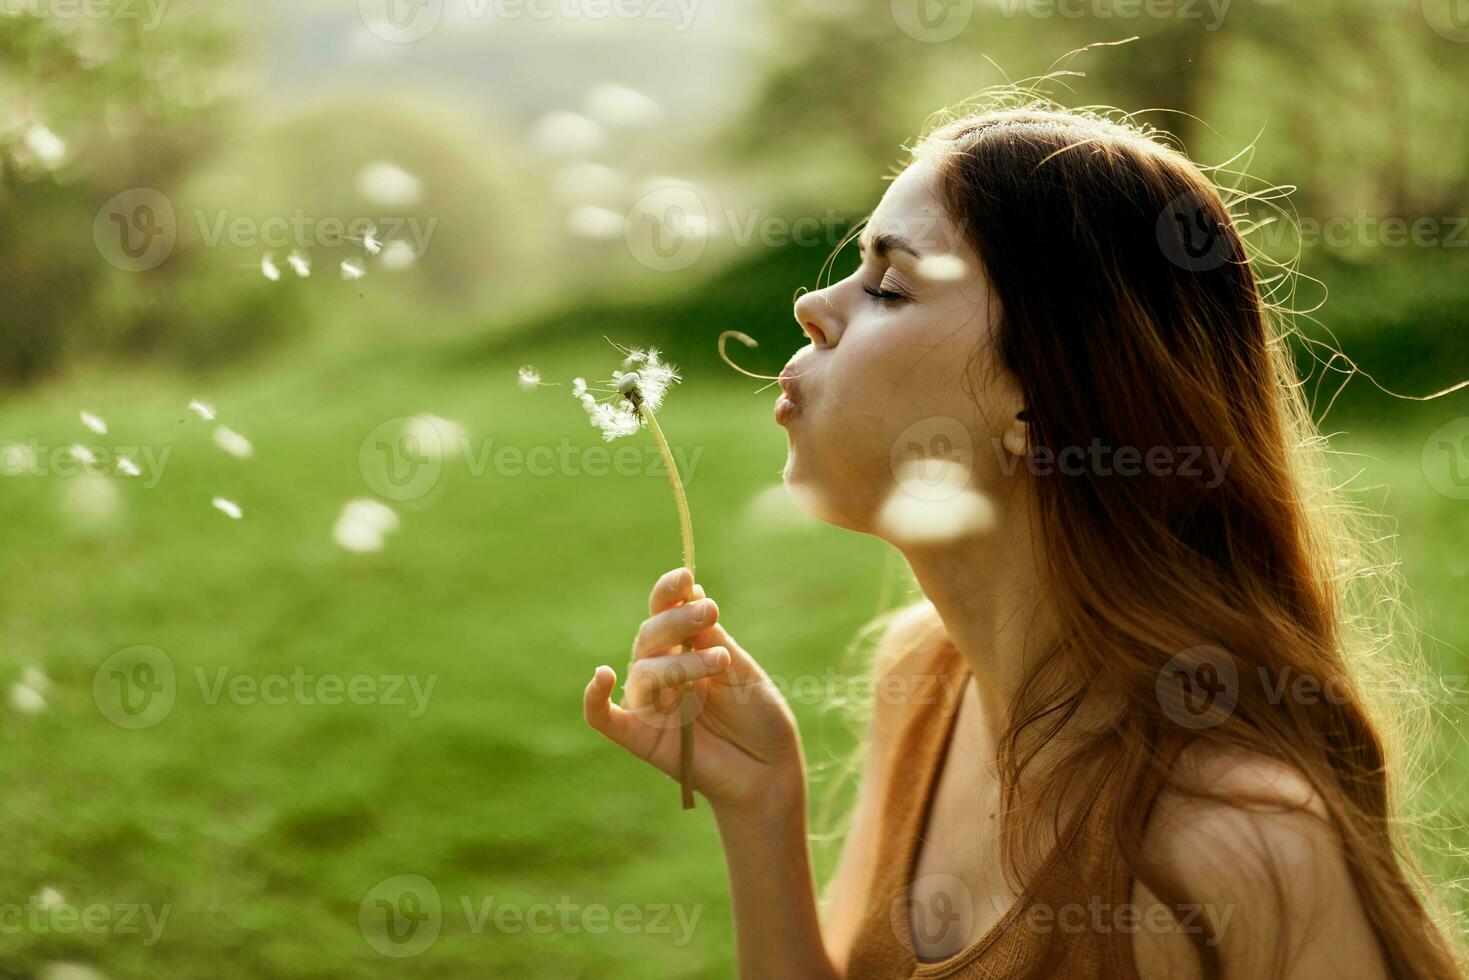 A female freelancer strolls carefree and happily in a green park and blows off a dandelion flower in the sunset light photo